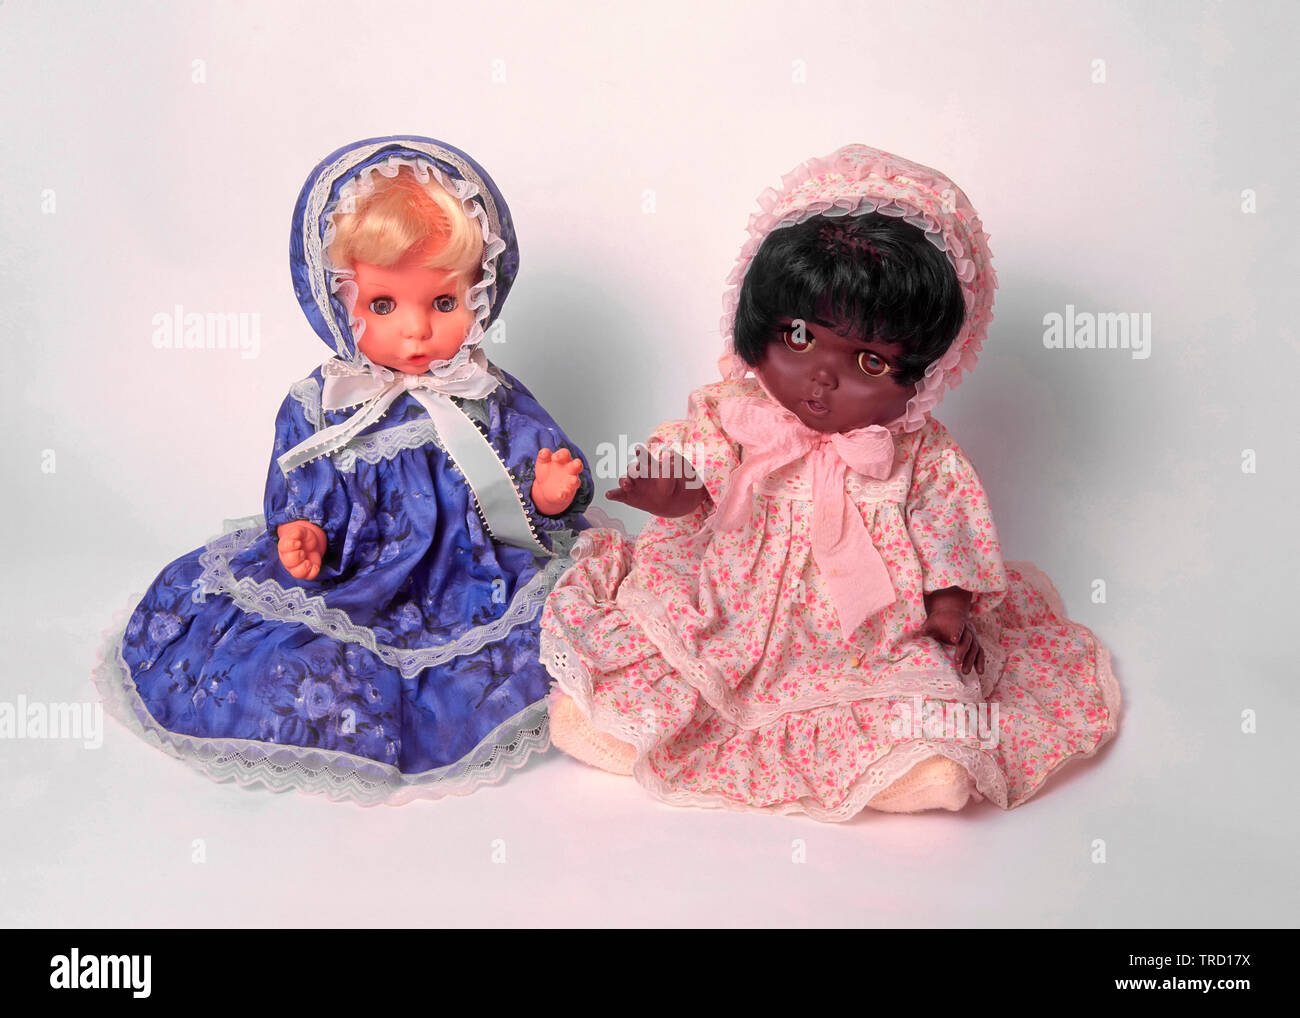 Black and white childrens toy doll wearing pretty dolls clothes sat together white studio background concept ideas image racial harmony & diversity Stock Photo